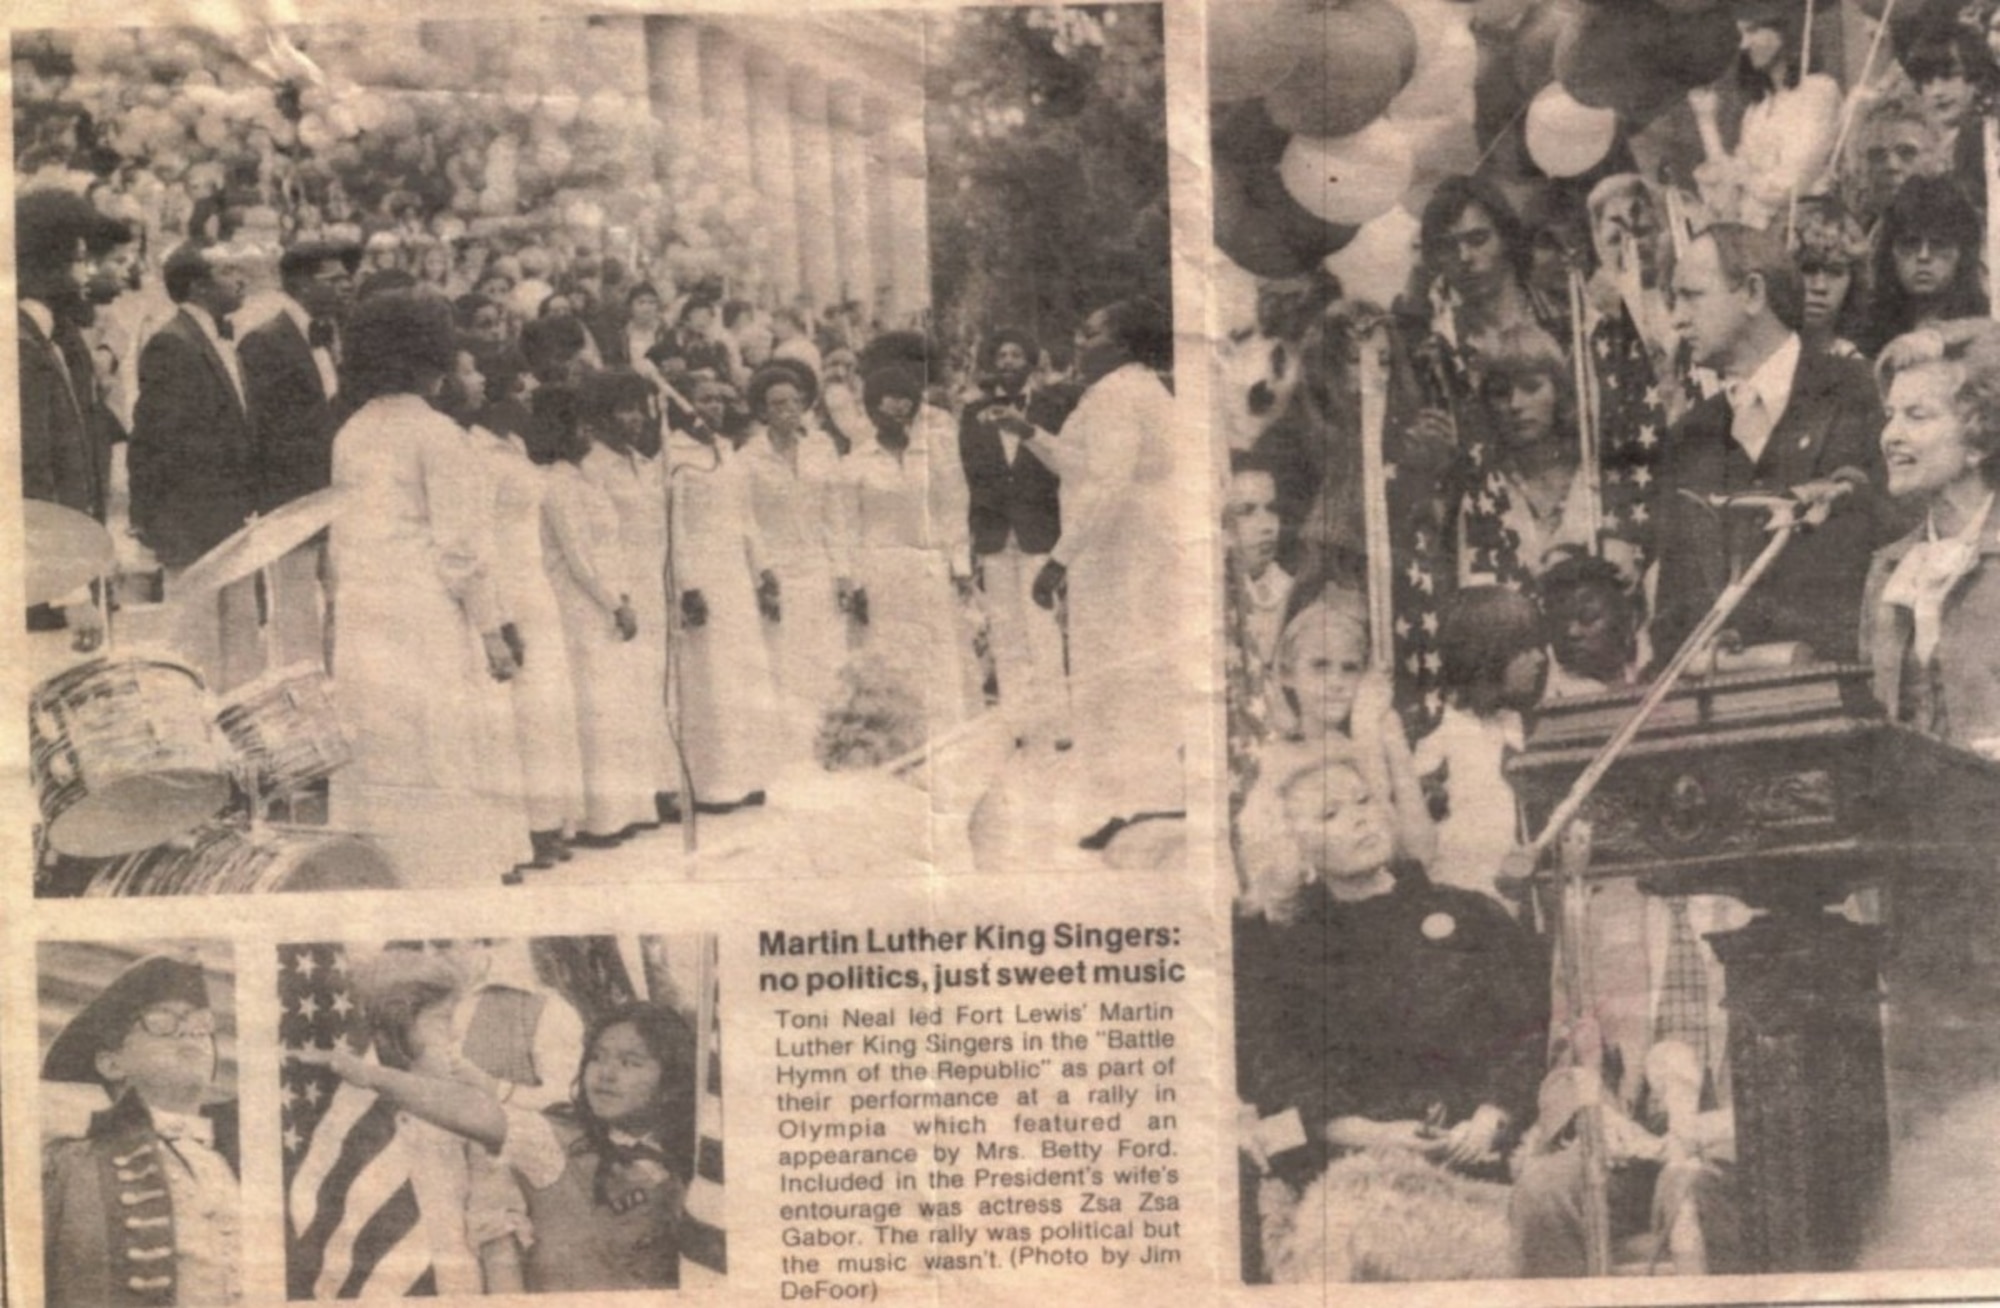 Newspaper clipping of an article depicting the Martin Luther King Singers performing in Olympia for the late former first lady Betty Ford and her entourage, including the late actress, Zsa Zsa Gabor.